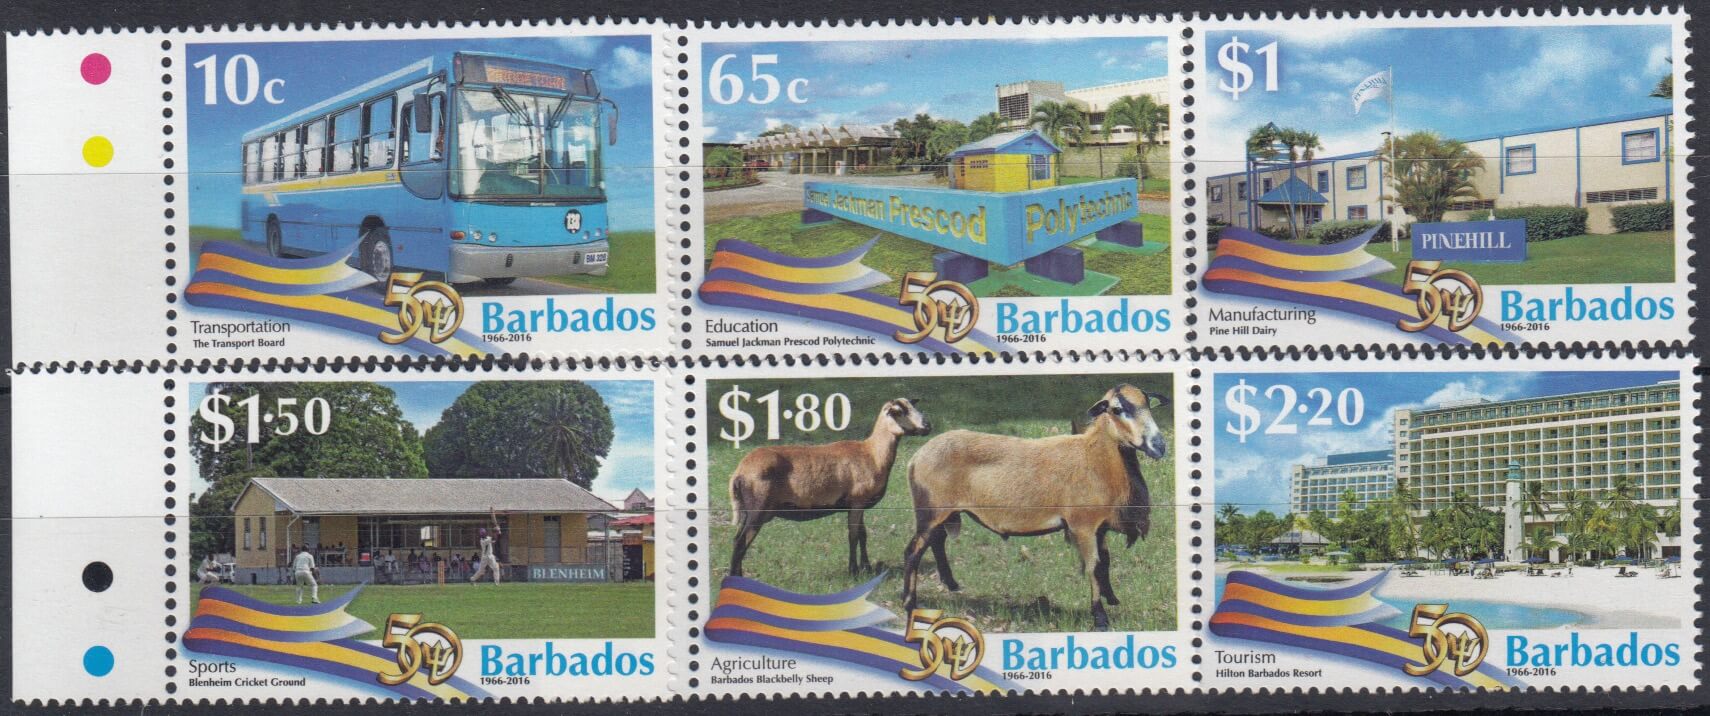 Barbados SG1454-1459| 50th Anniversary of Independence in Barbados